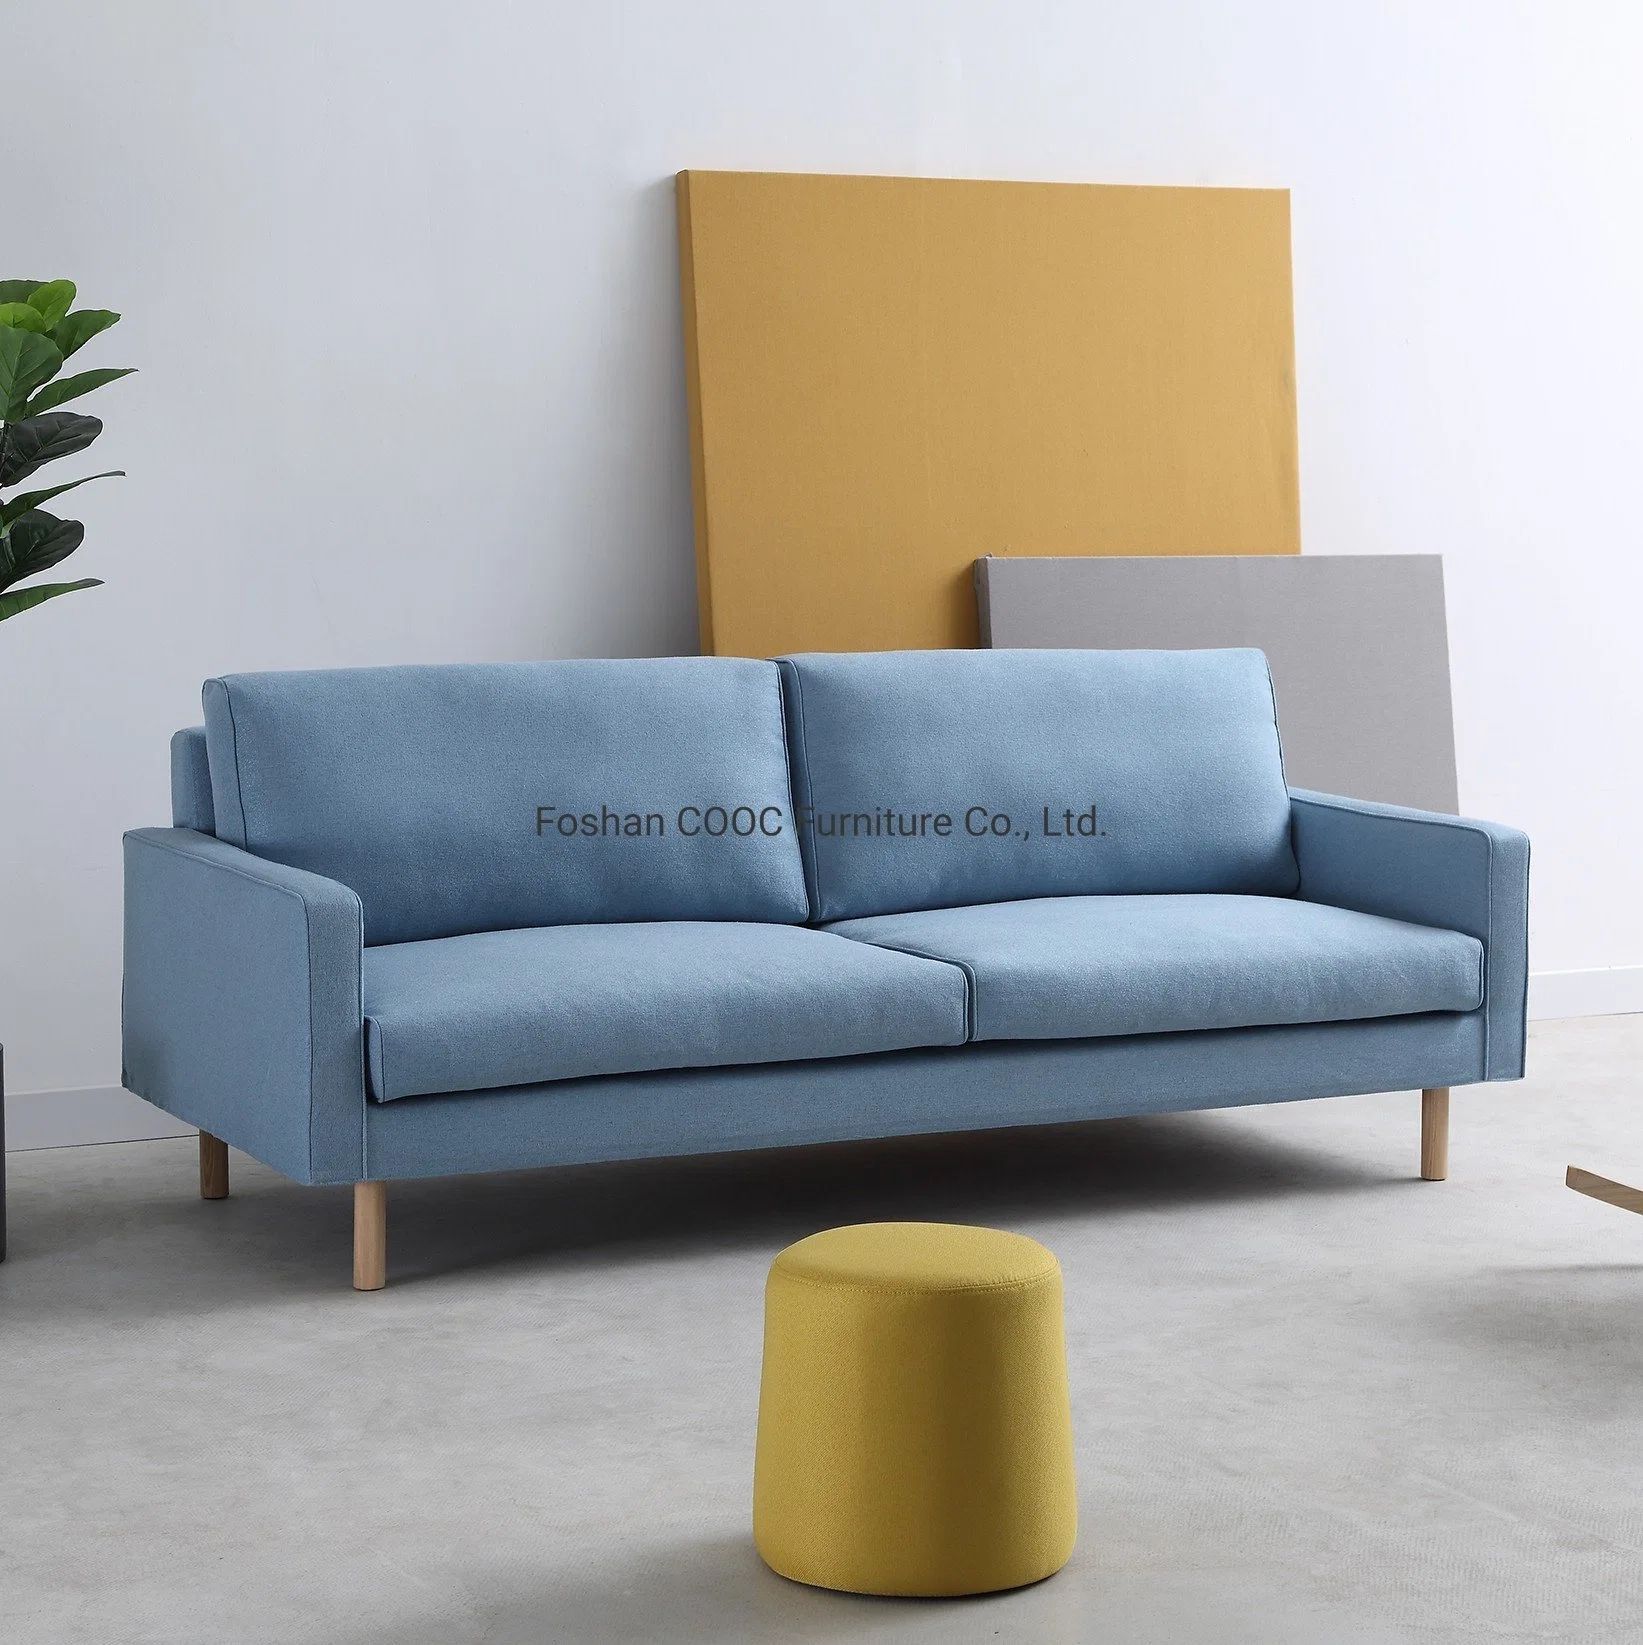 Cooc Best Chinese Wholesale Nordic Design Blue Linen Couches Sofa Set Modern  Fabric Sofa Apartment Living Room Home Furniture – China Sofa, Fabric Sofa  | Made In China With Regard To Modern Blue Linen Sofas (View 11 of 15)